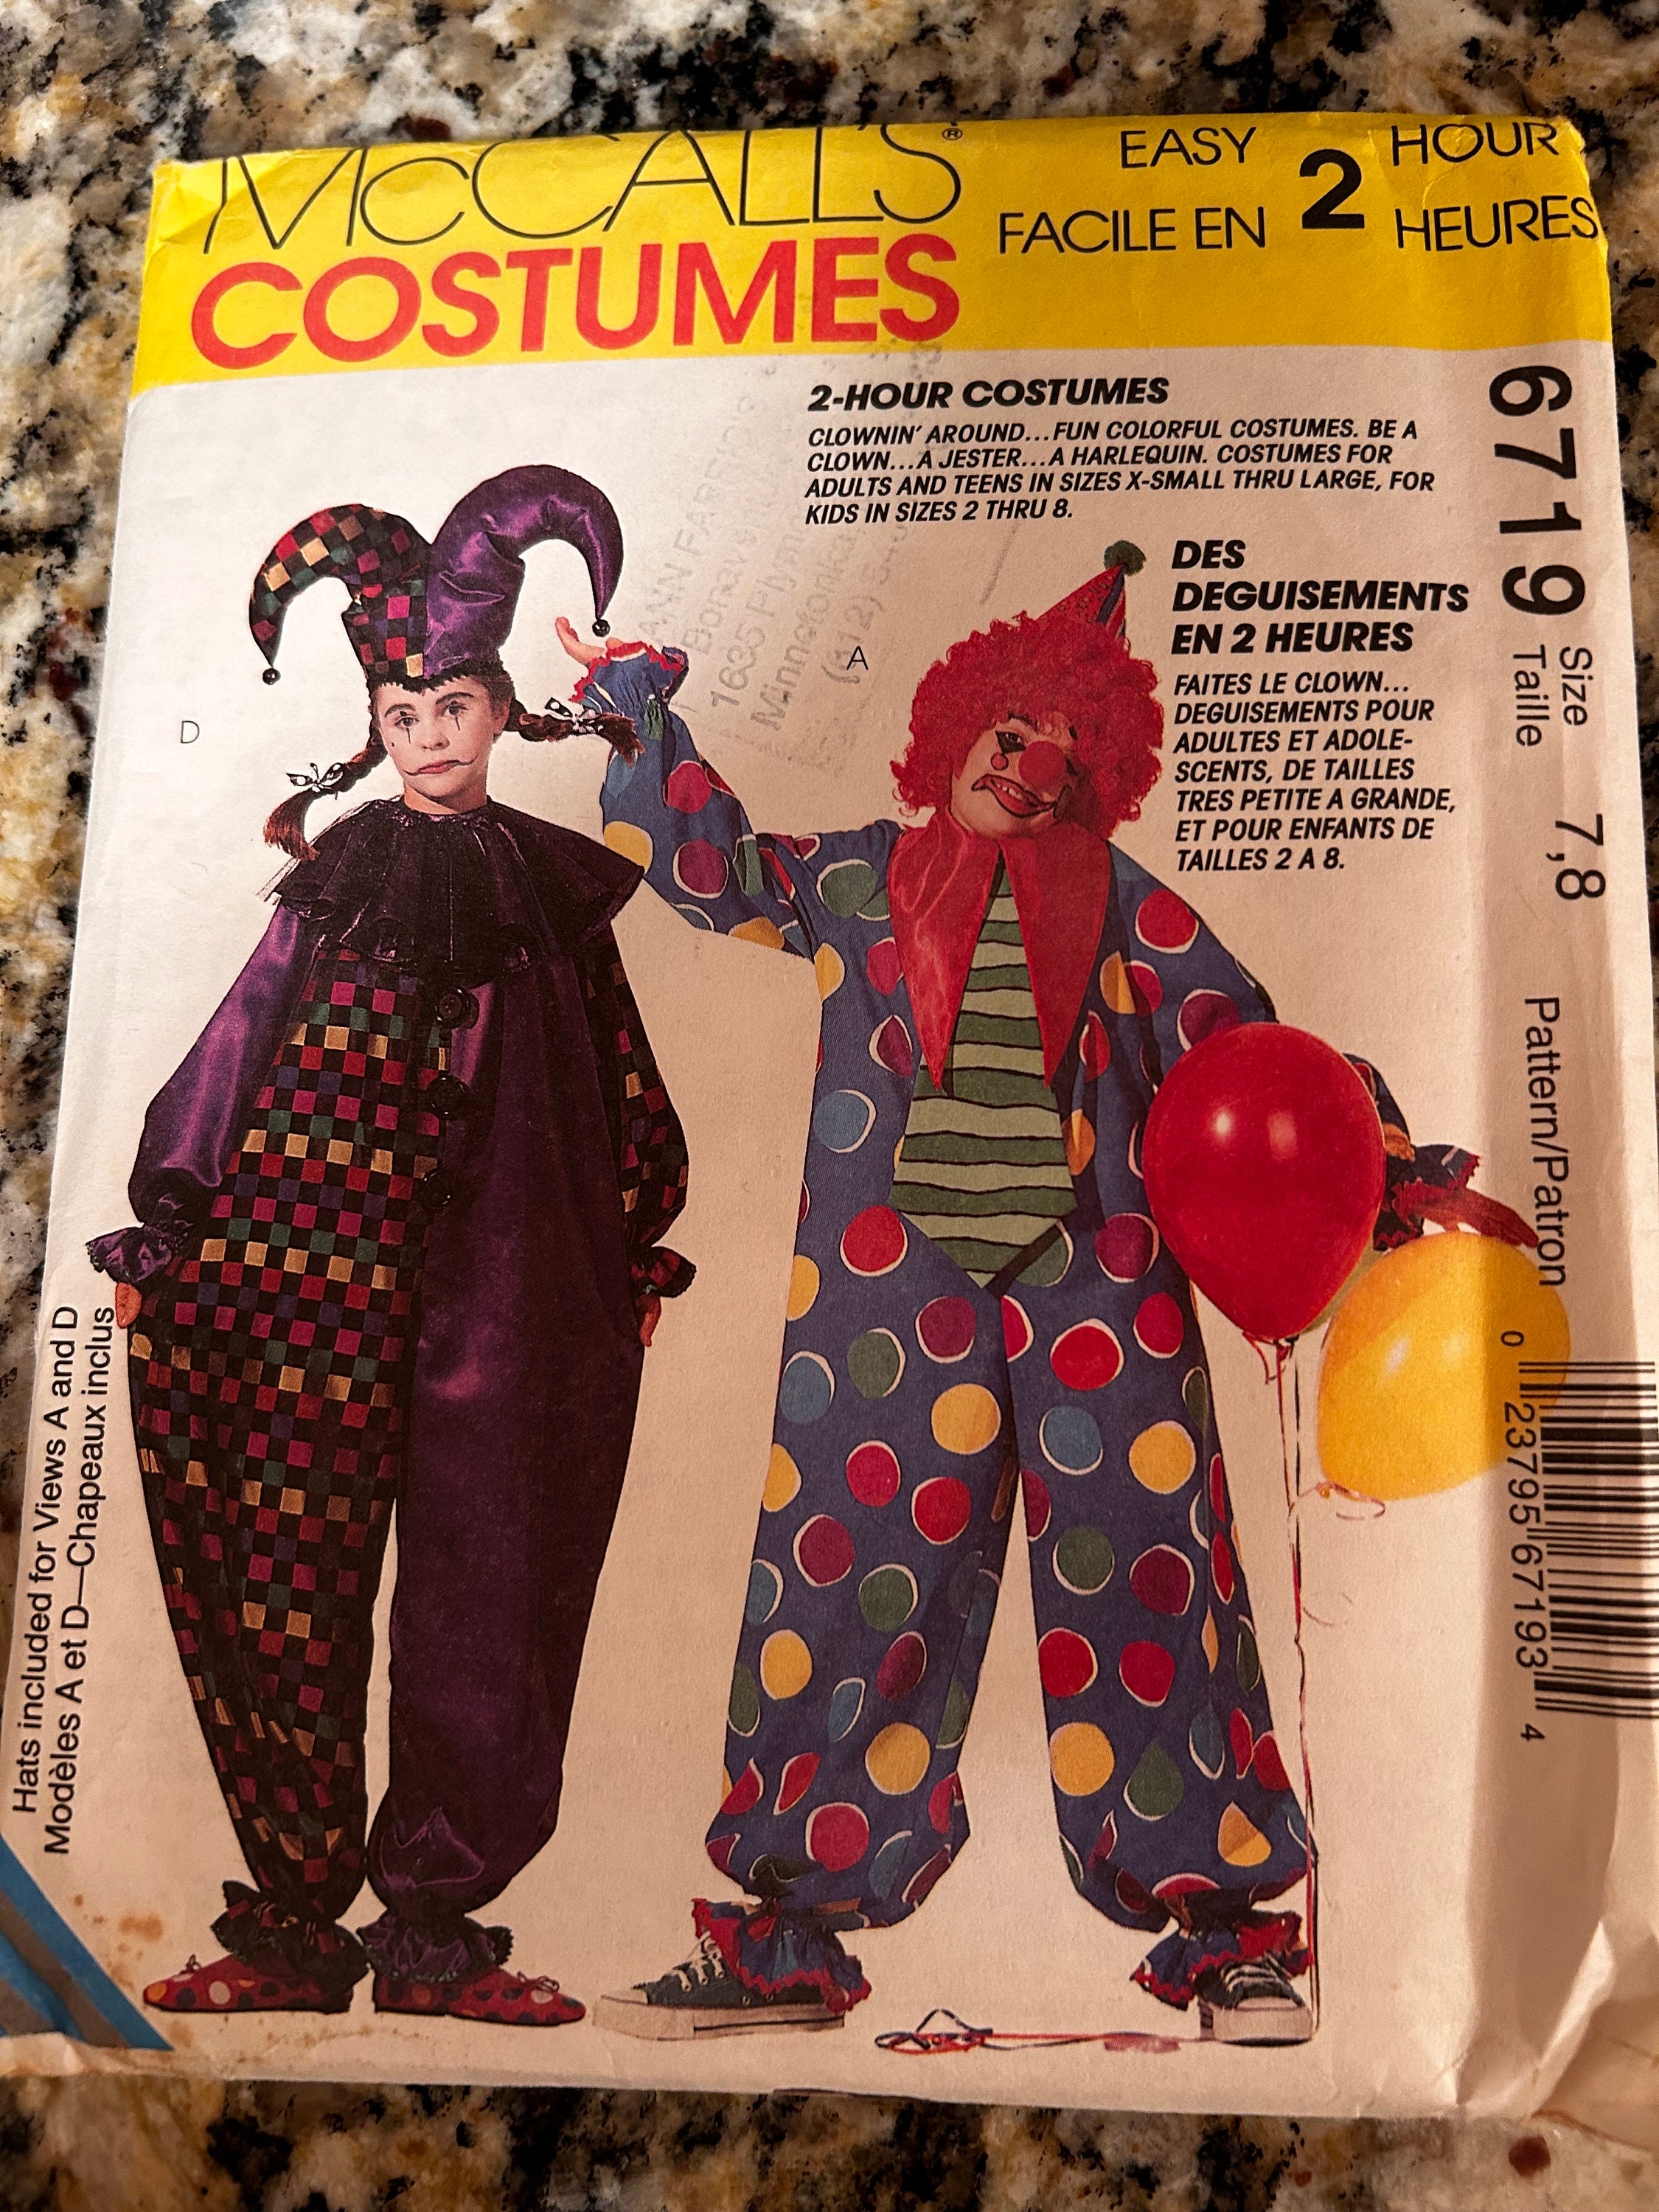  McCall's 8868 Sewing Pattern Childrens 2 Hour Costumes Cowboy &  Indians Size 7-8 : Arts, Crafts & Sewing